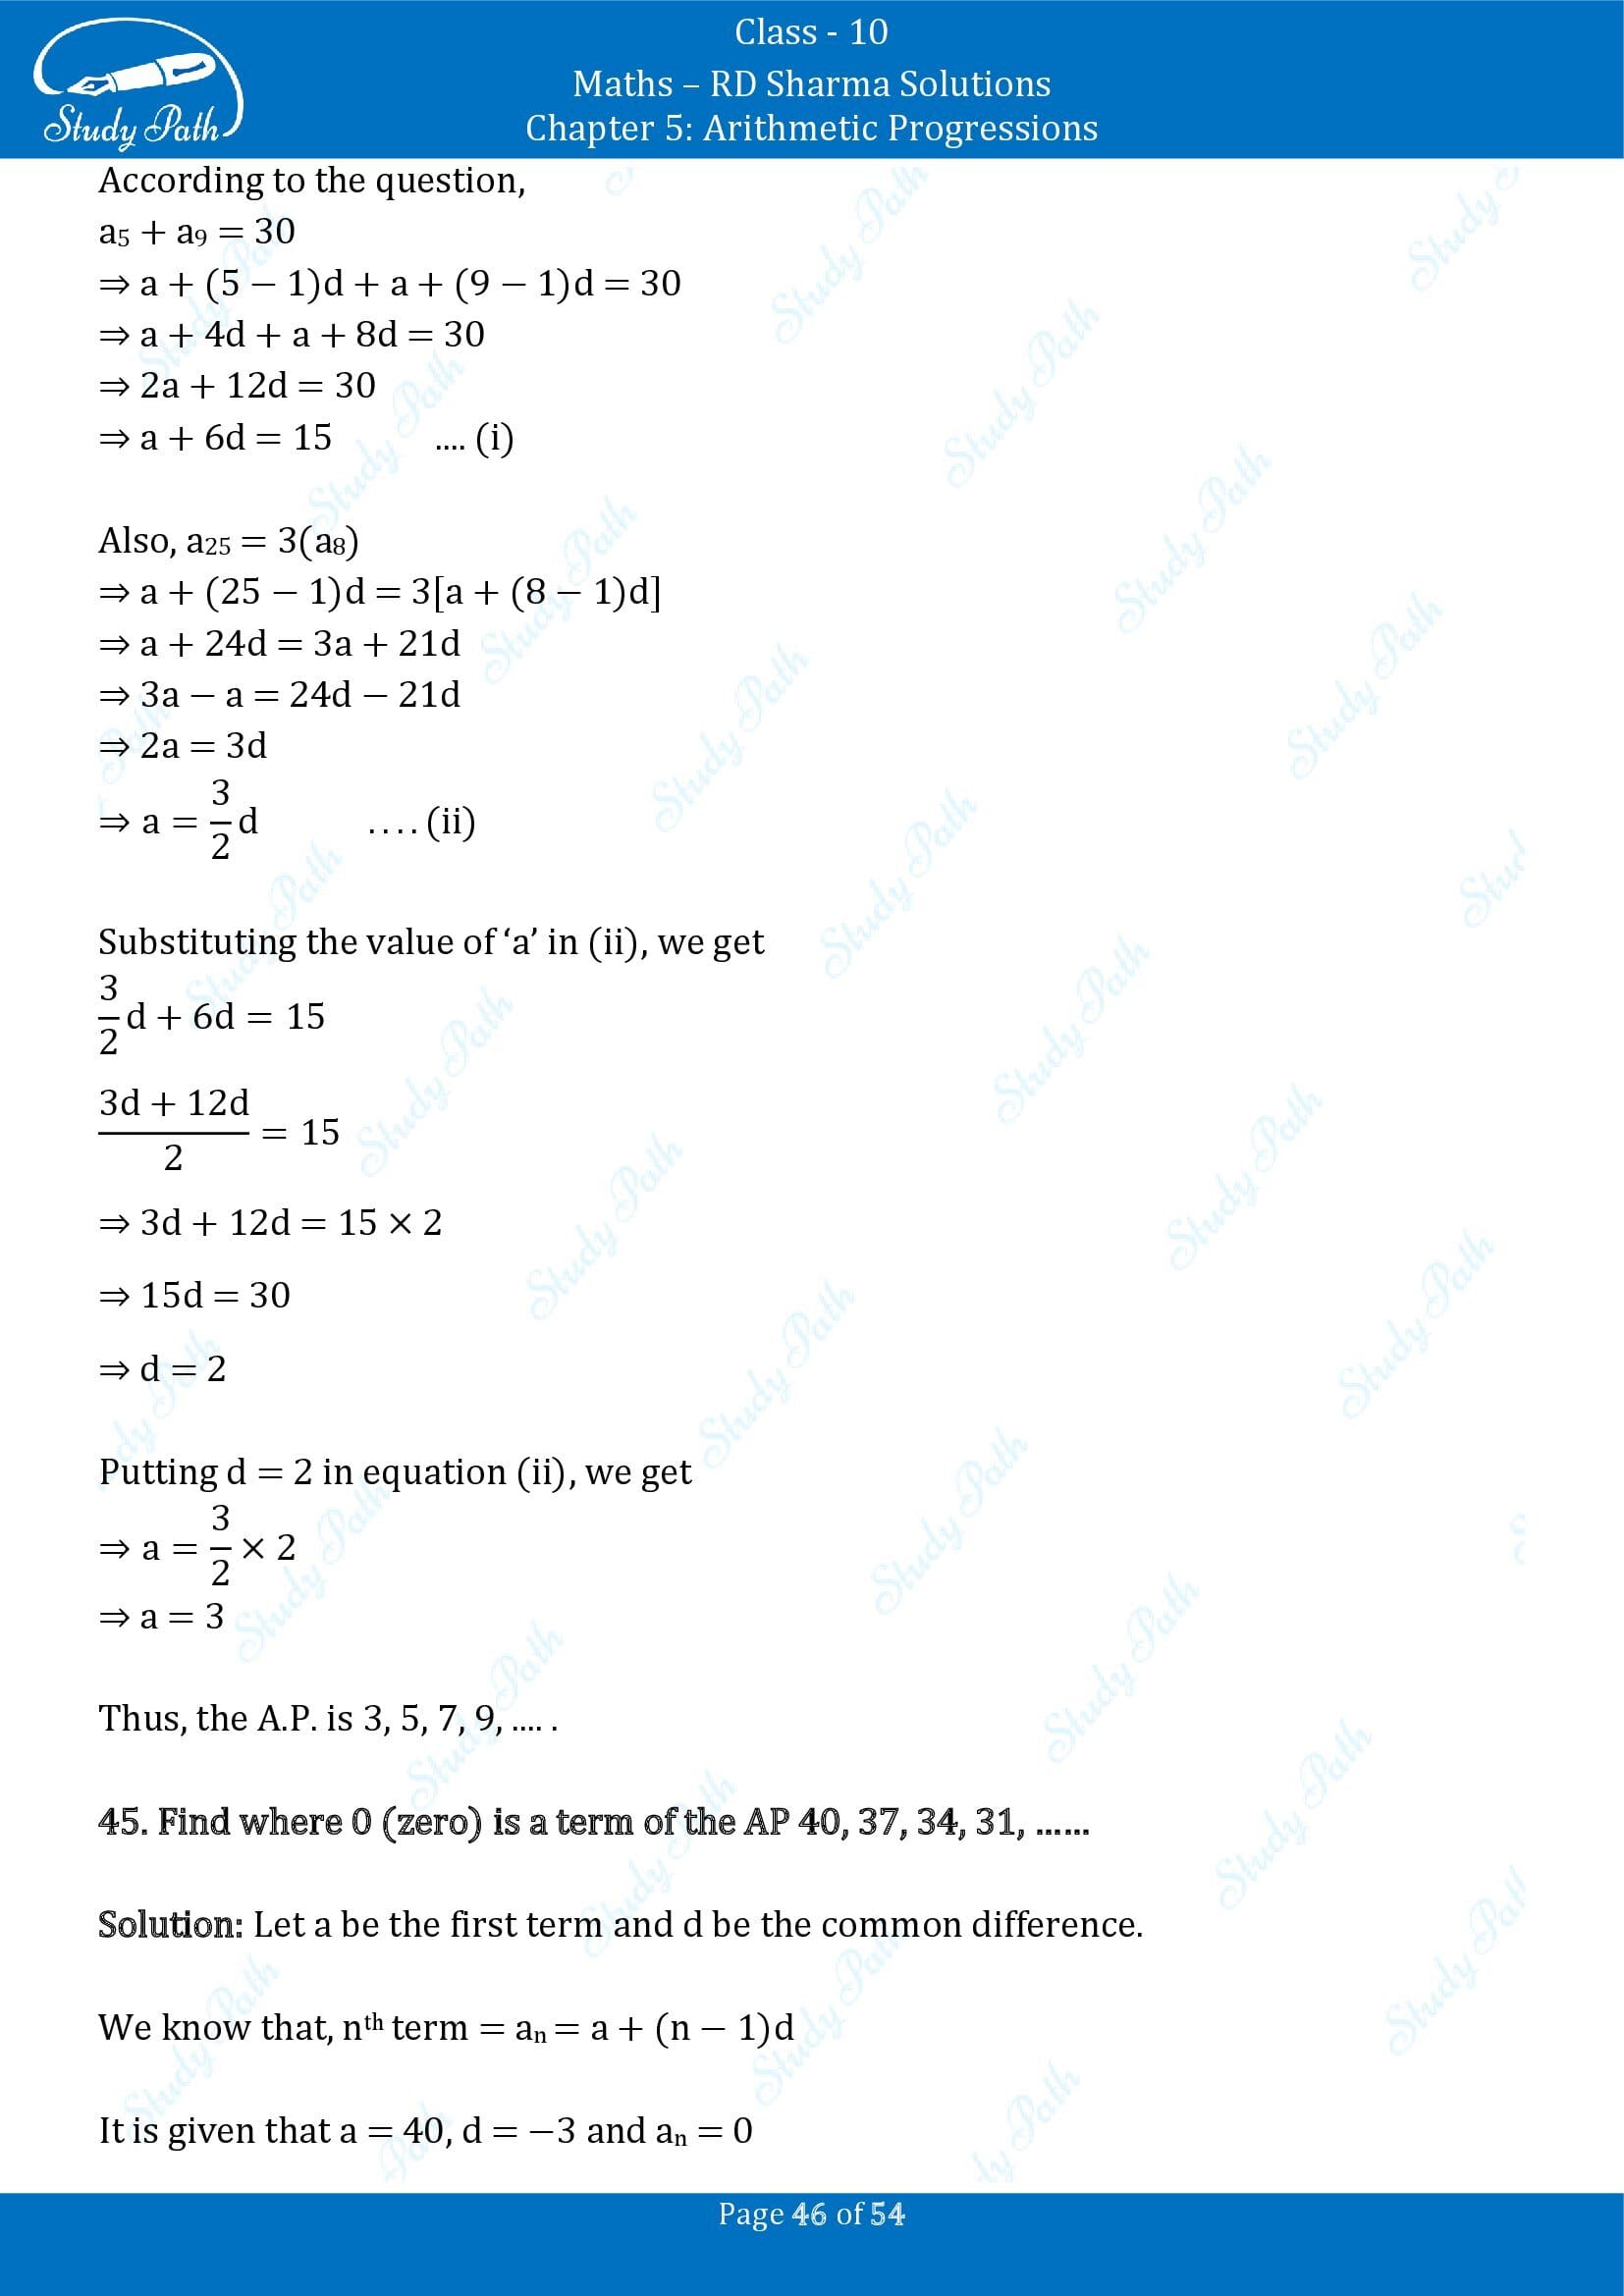 RD Sharma Solutions Class 10 Chapter 5 Arithmetic Progressions Exercise 5.4 00046